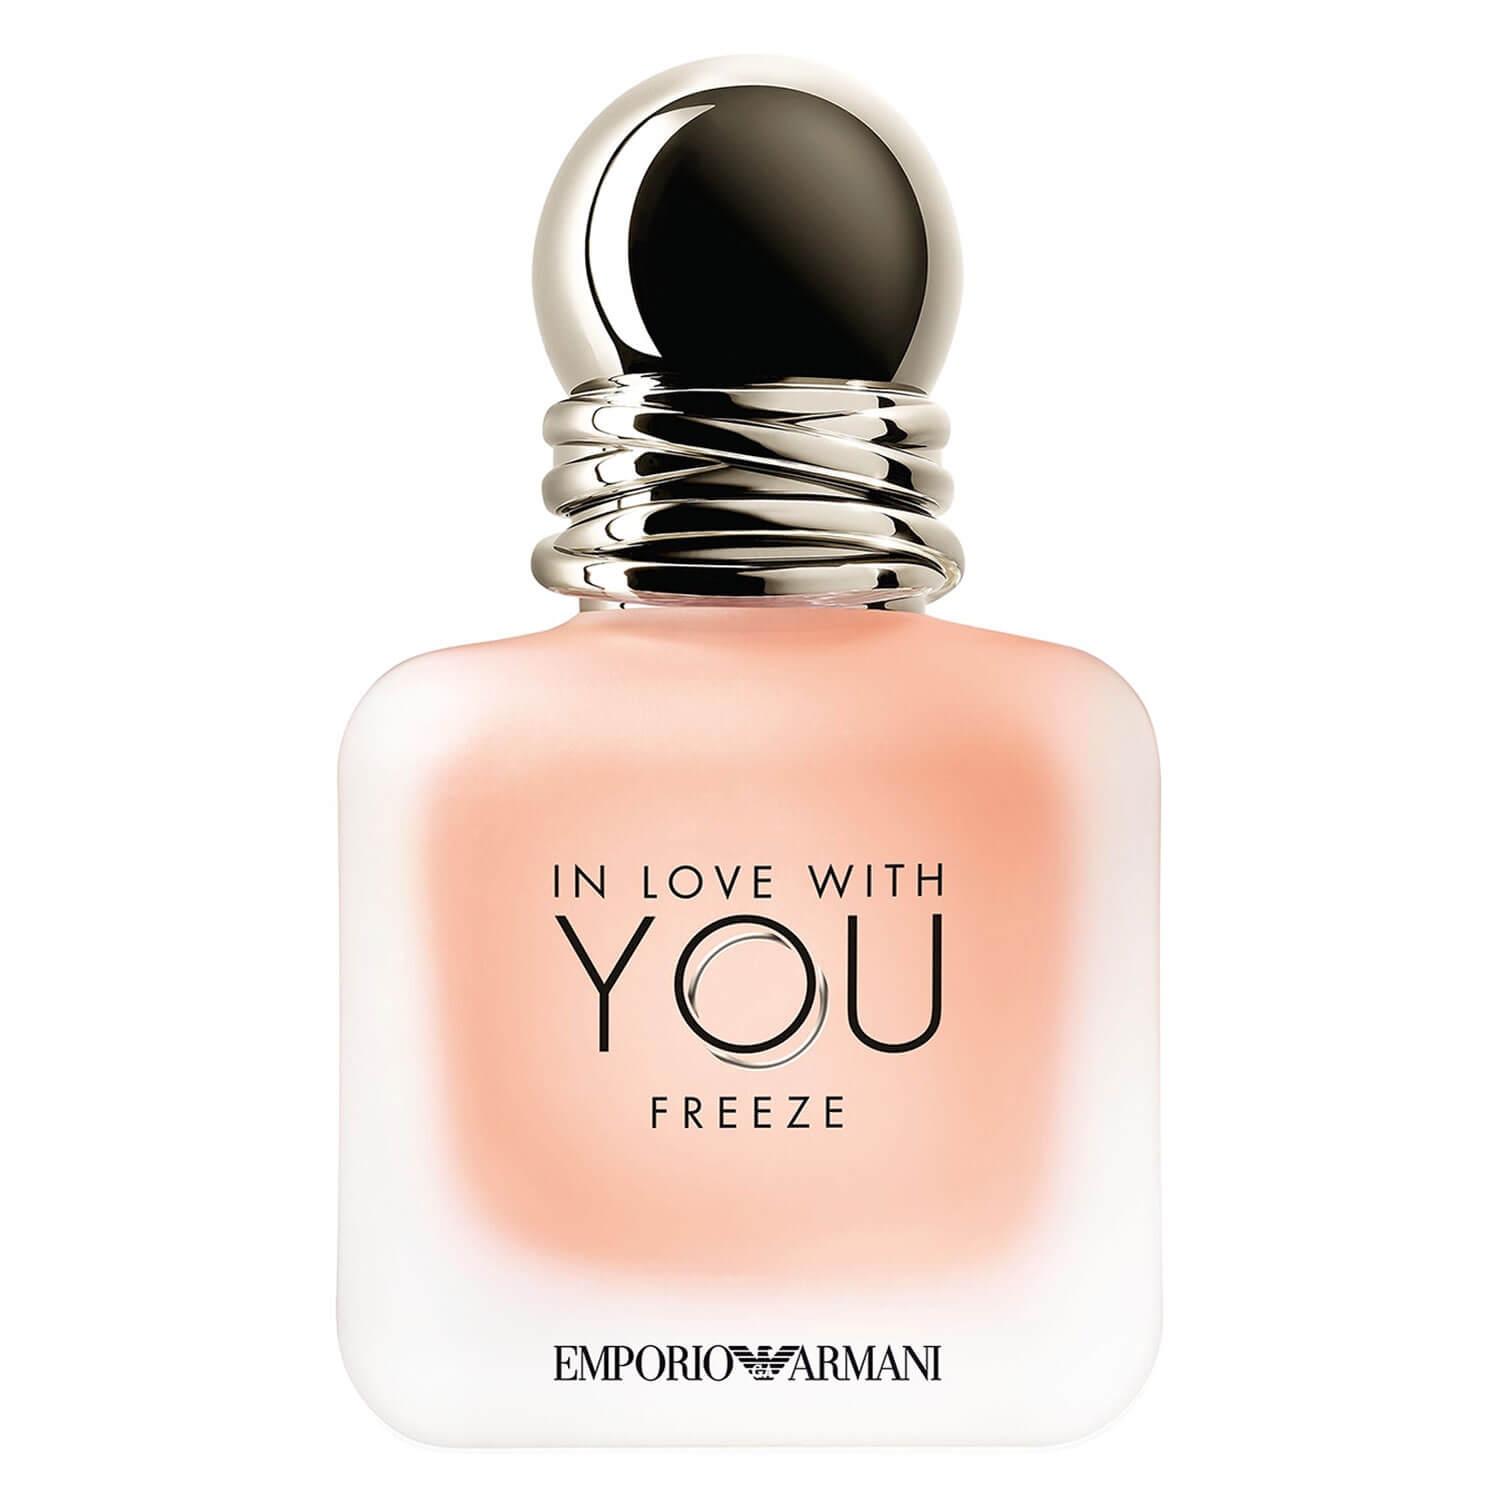 Product image from Emporio Armani - In Love With You Freeze Eau de Parfum